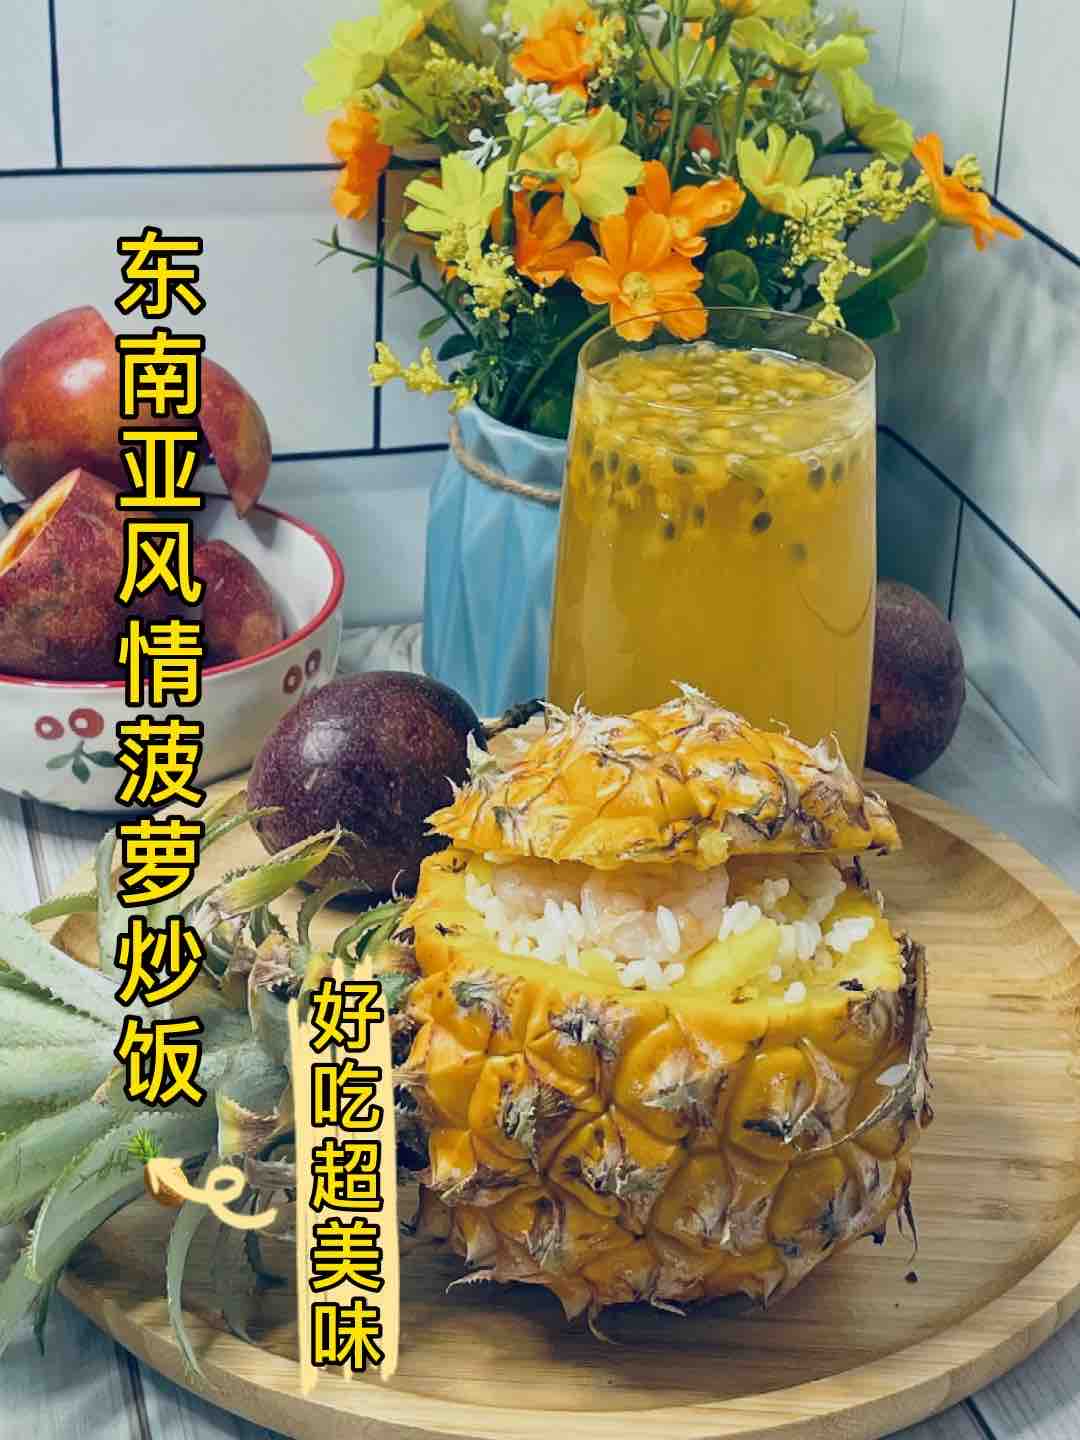 Stunning Pineapple and Shrimp Fried Rice ❗️❗️ Appetizing and Happy